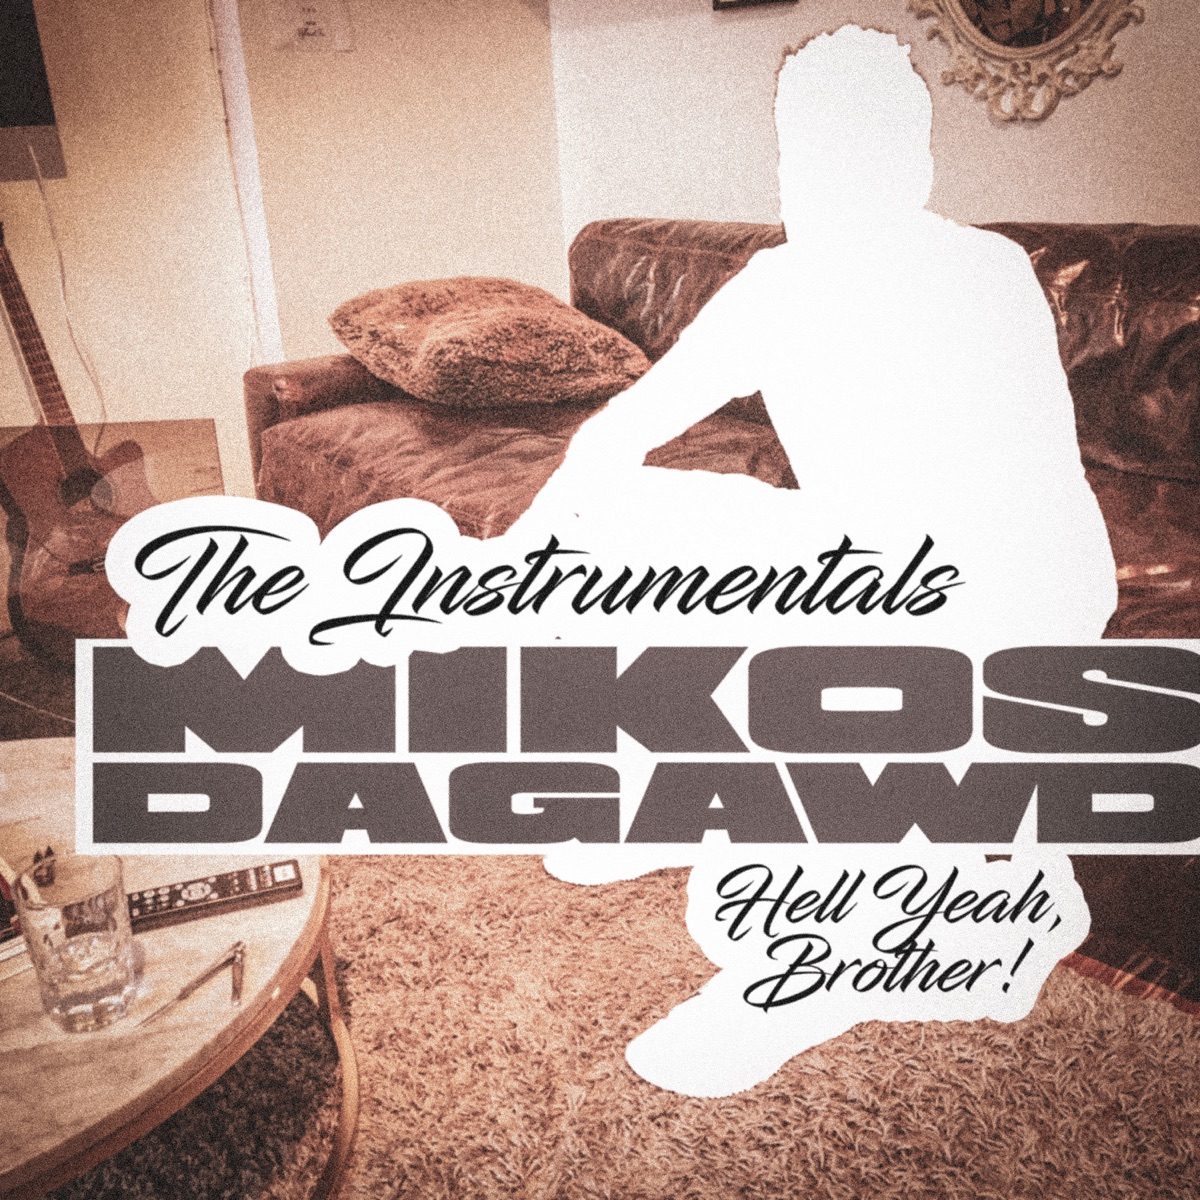 Hell Yeah, Brother! The Instrumentals - Album by Mikos Da Gawd - Apple Music